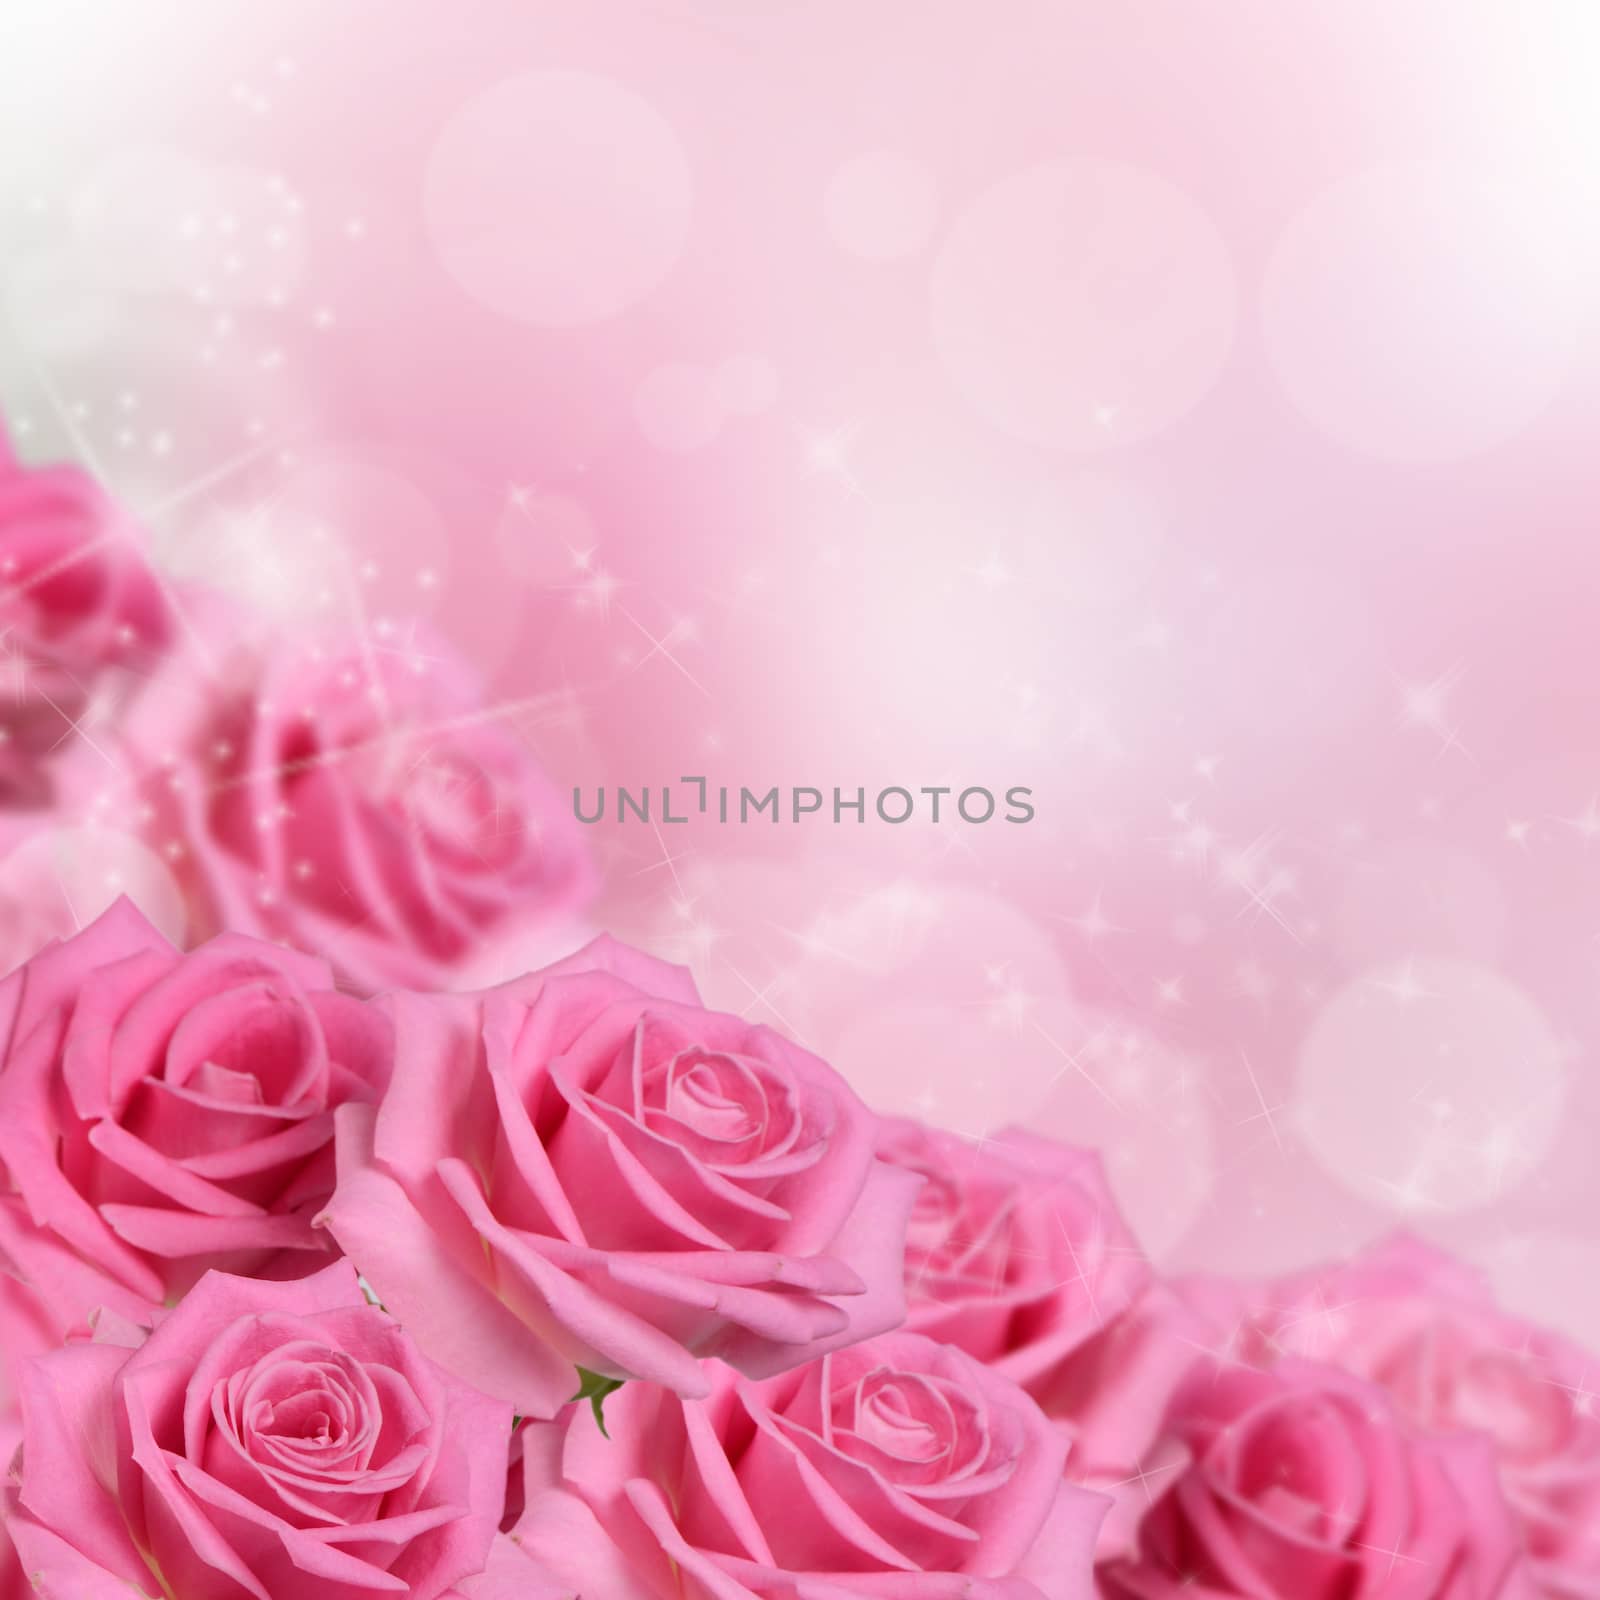 The pink beautiful rose as a background